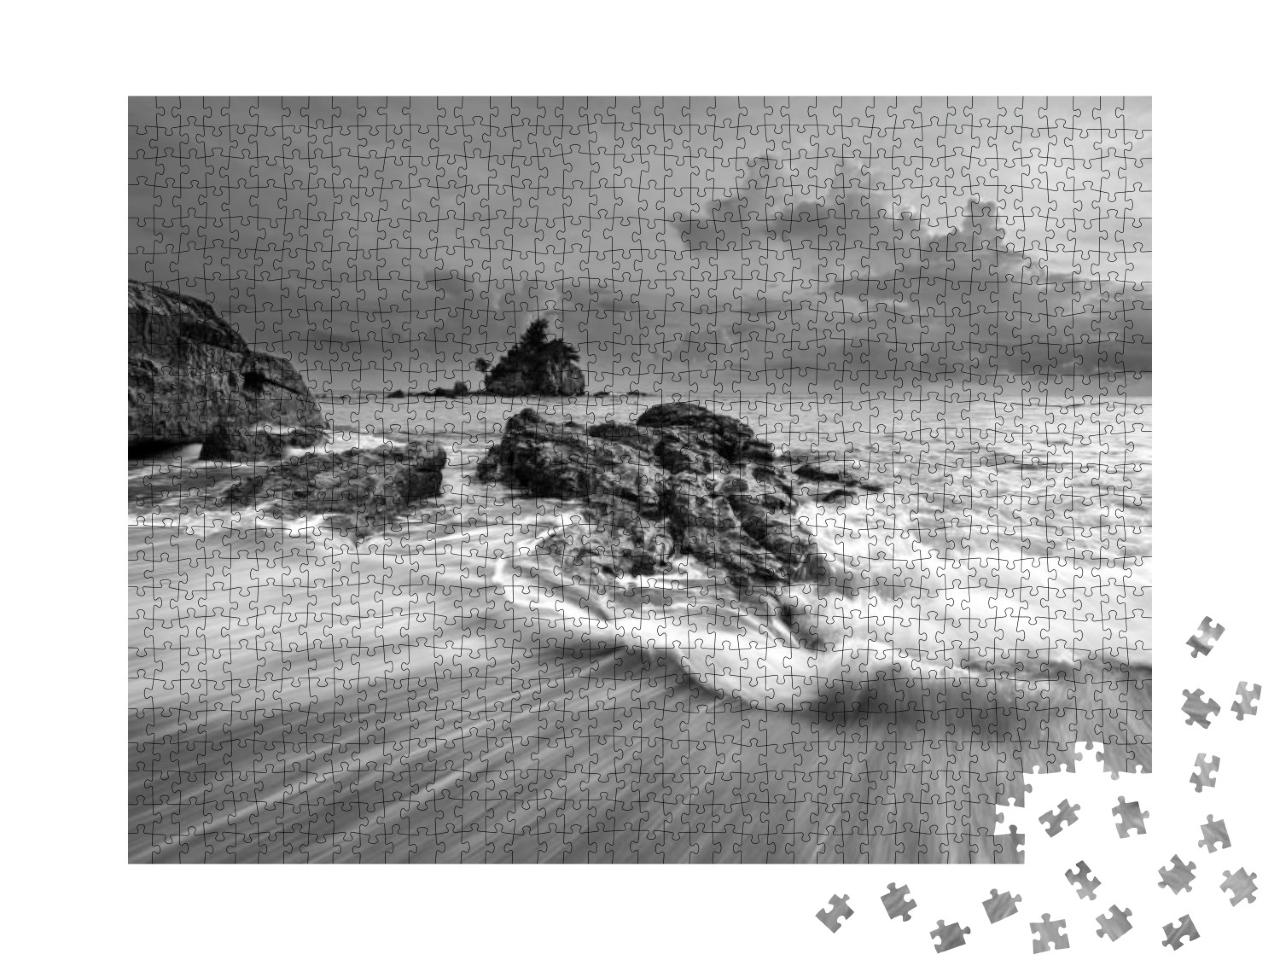 Beautiful Long Exposure Seascape in Black & White. Nature... Jigsaw Puzzle with 1000 pieces